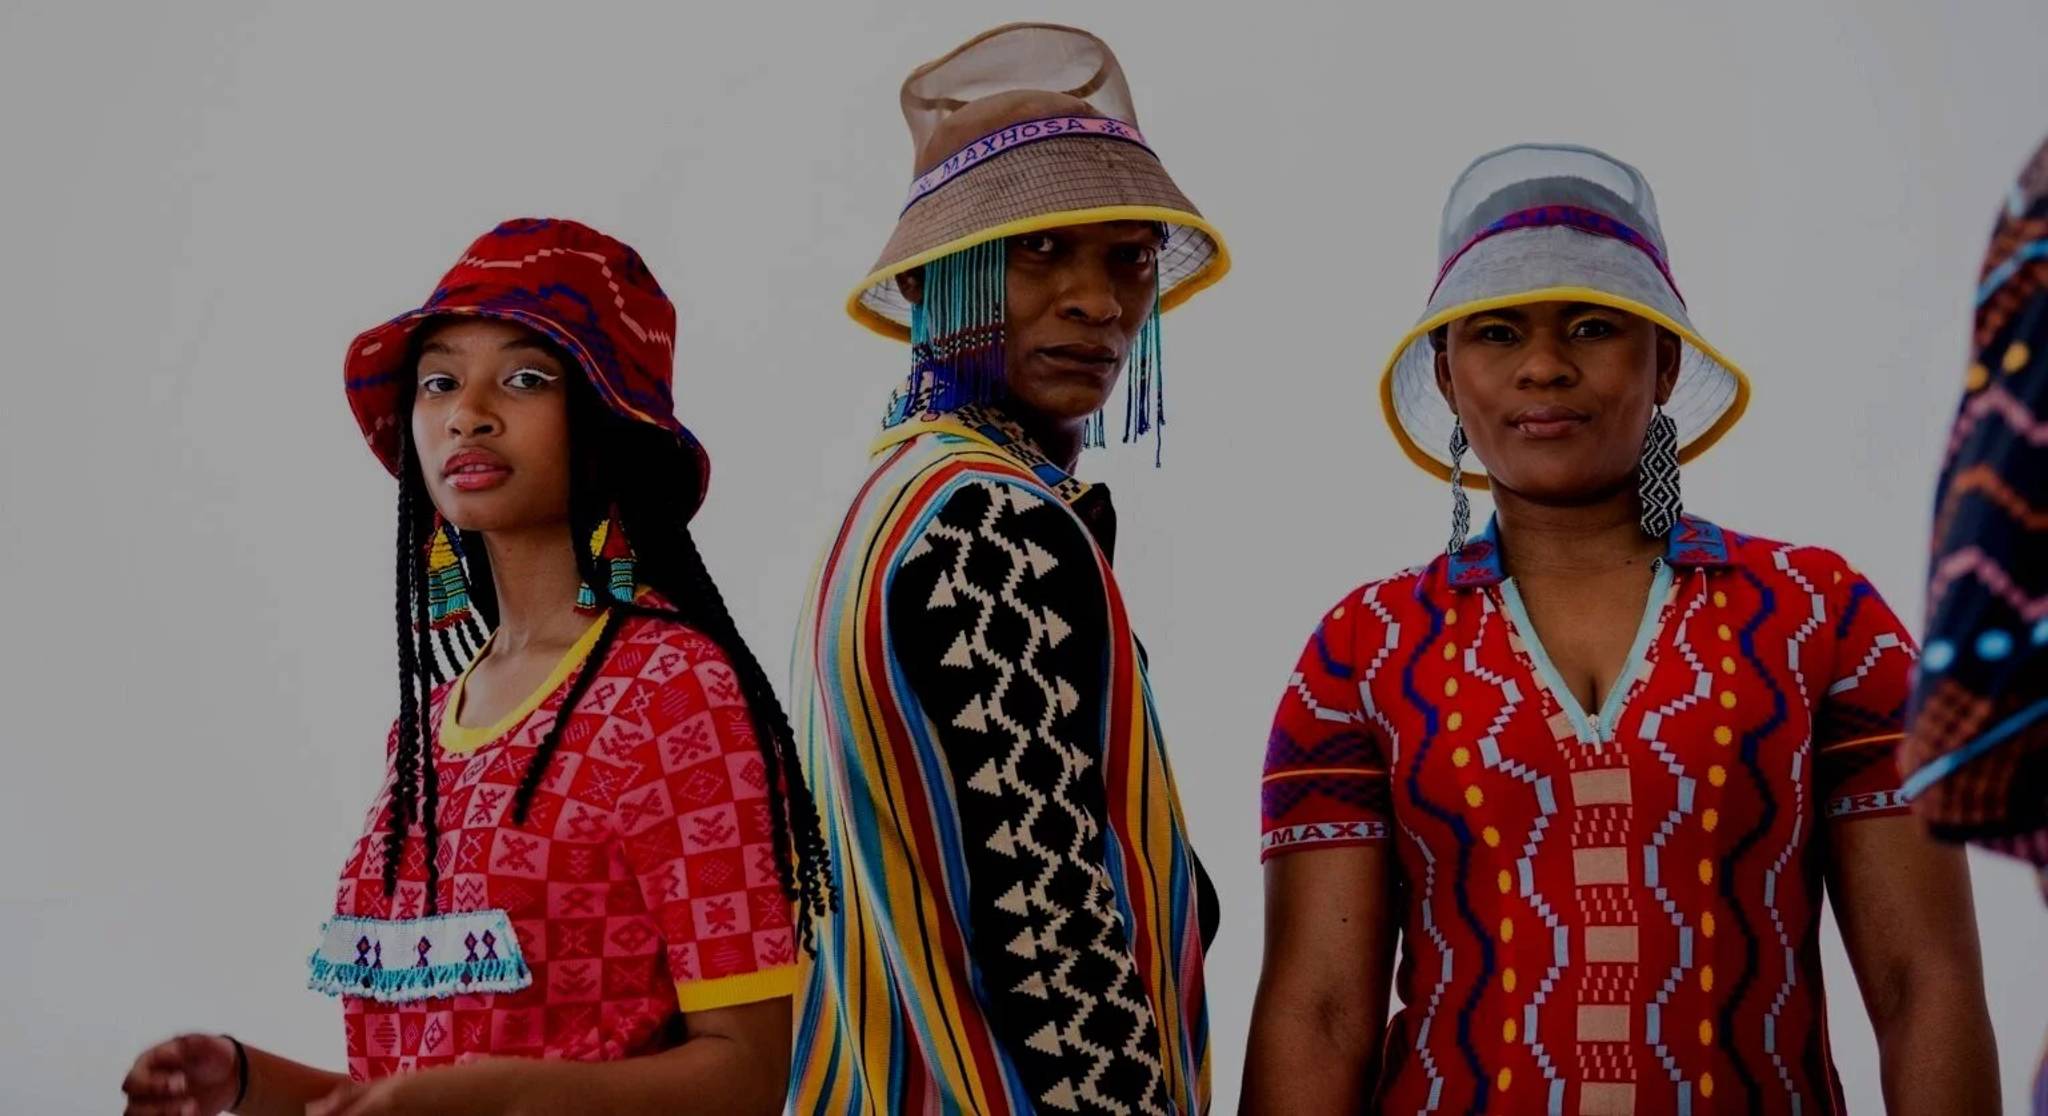 African fashion is leading the sustainability charge